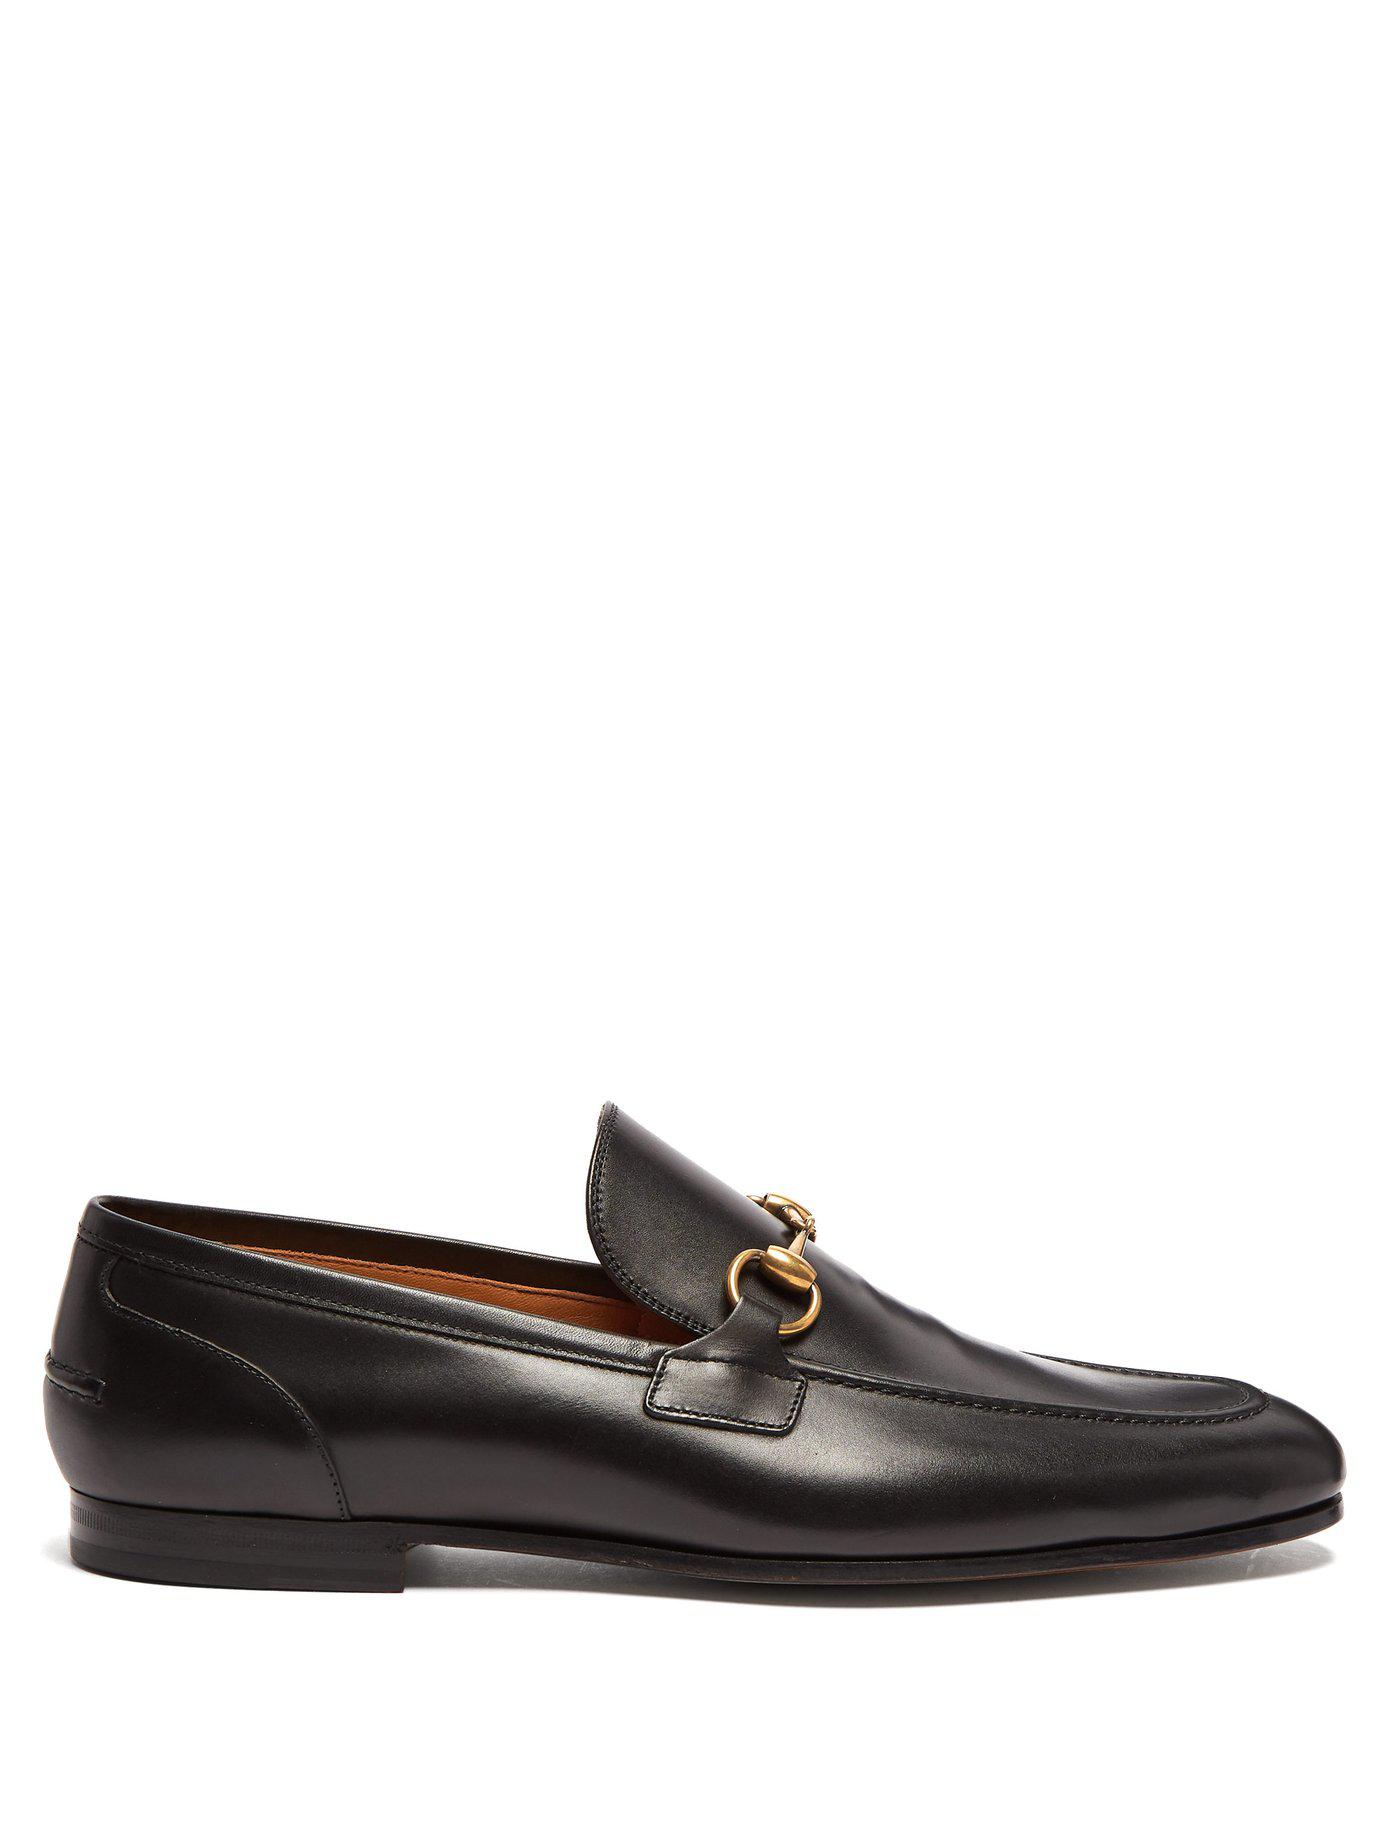 Lyst - Gucci Jordaan Leather Loafers in Black for Men